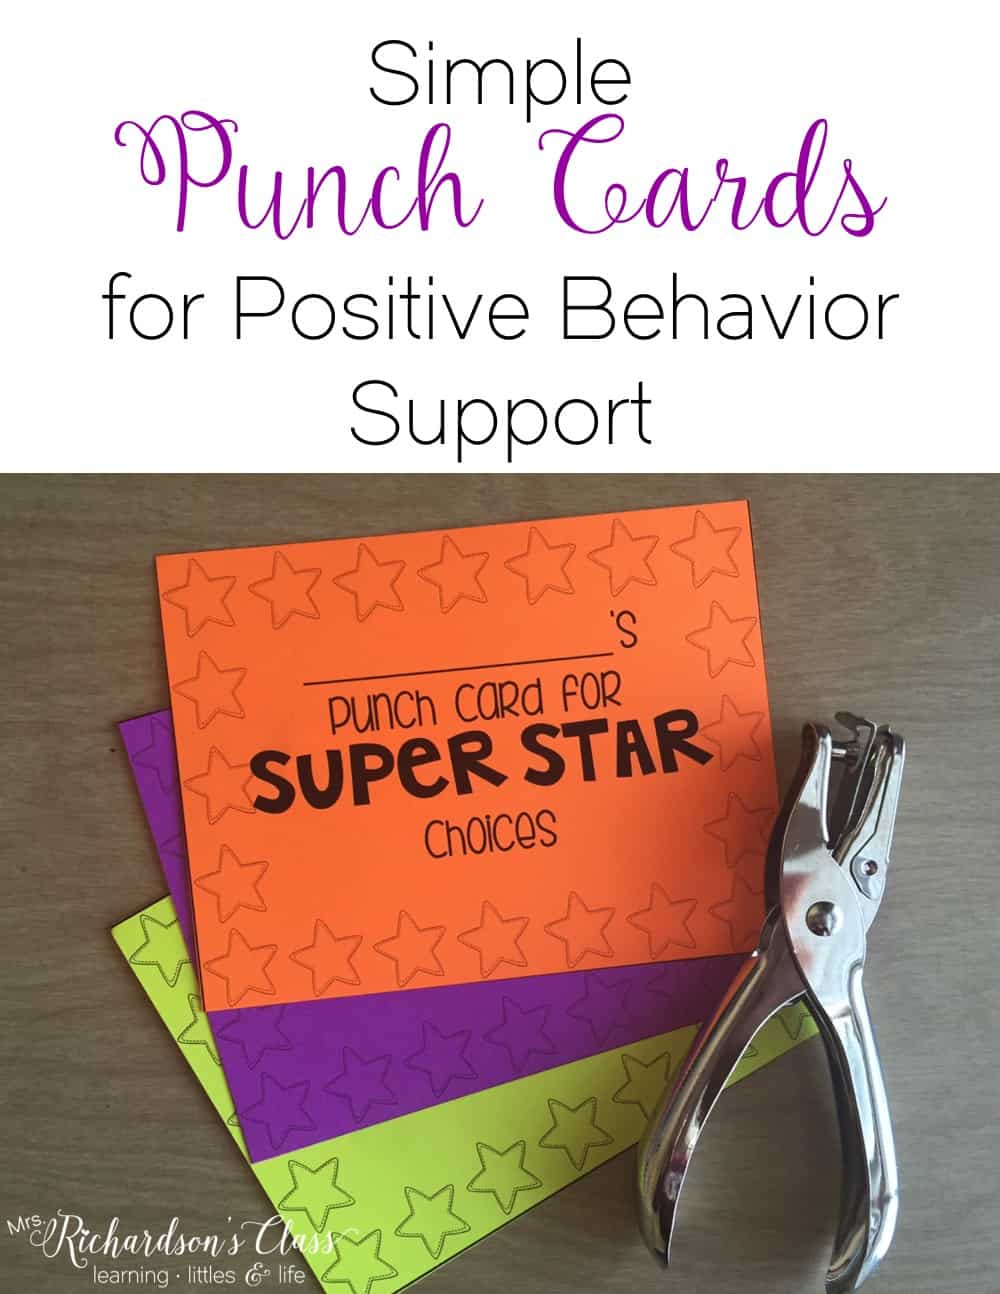 Simple Punch Cards for Positive Behavior Support - Mrs. Richardson's Class